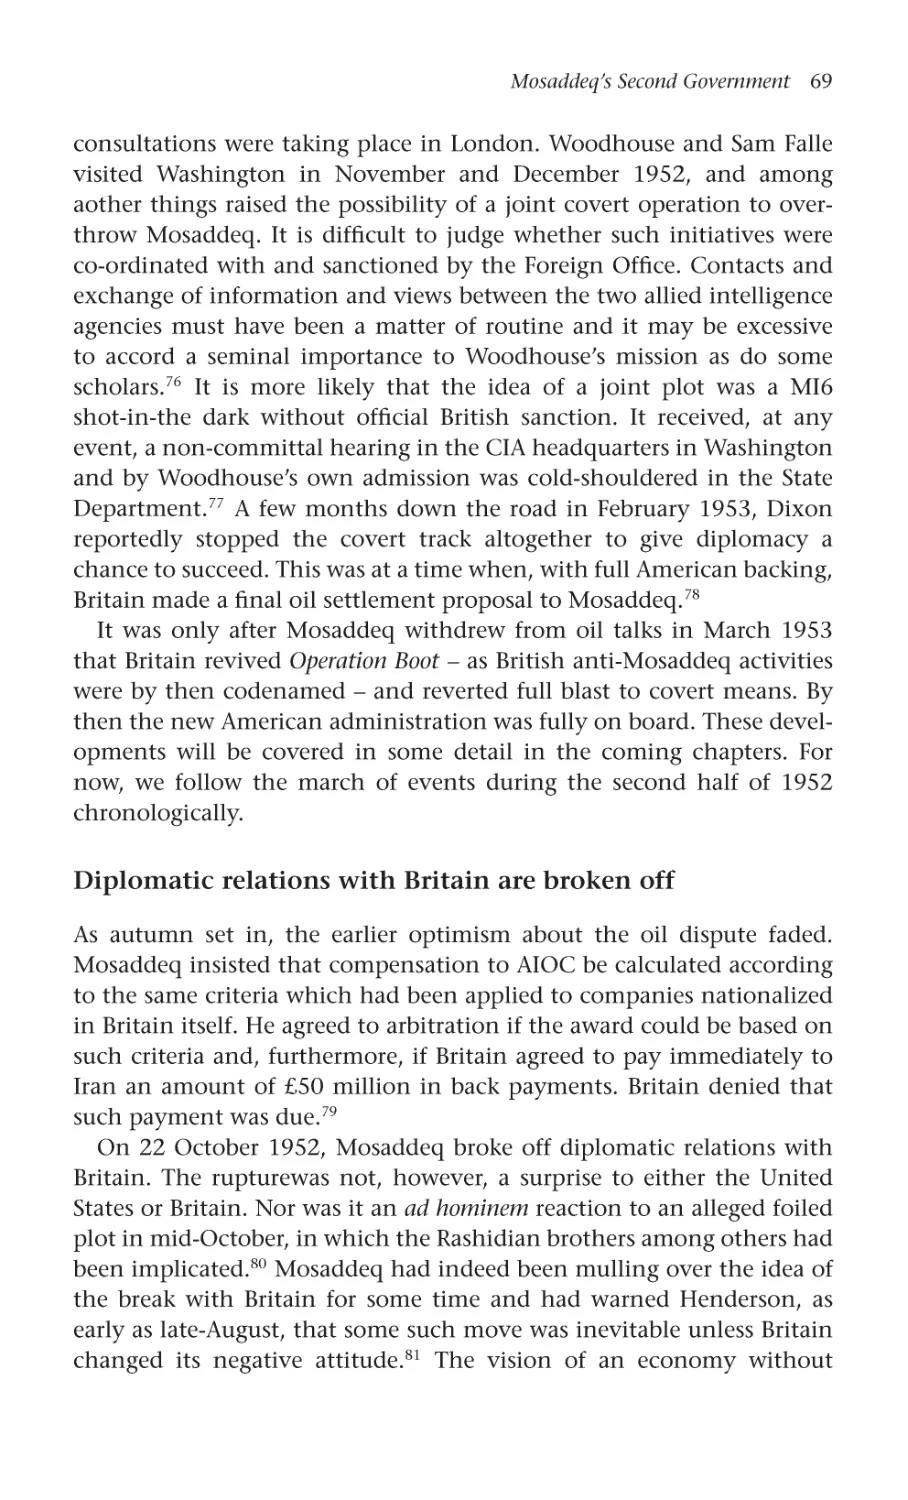 Diplomatic relations with Britain are broken off